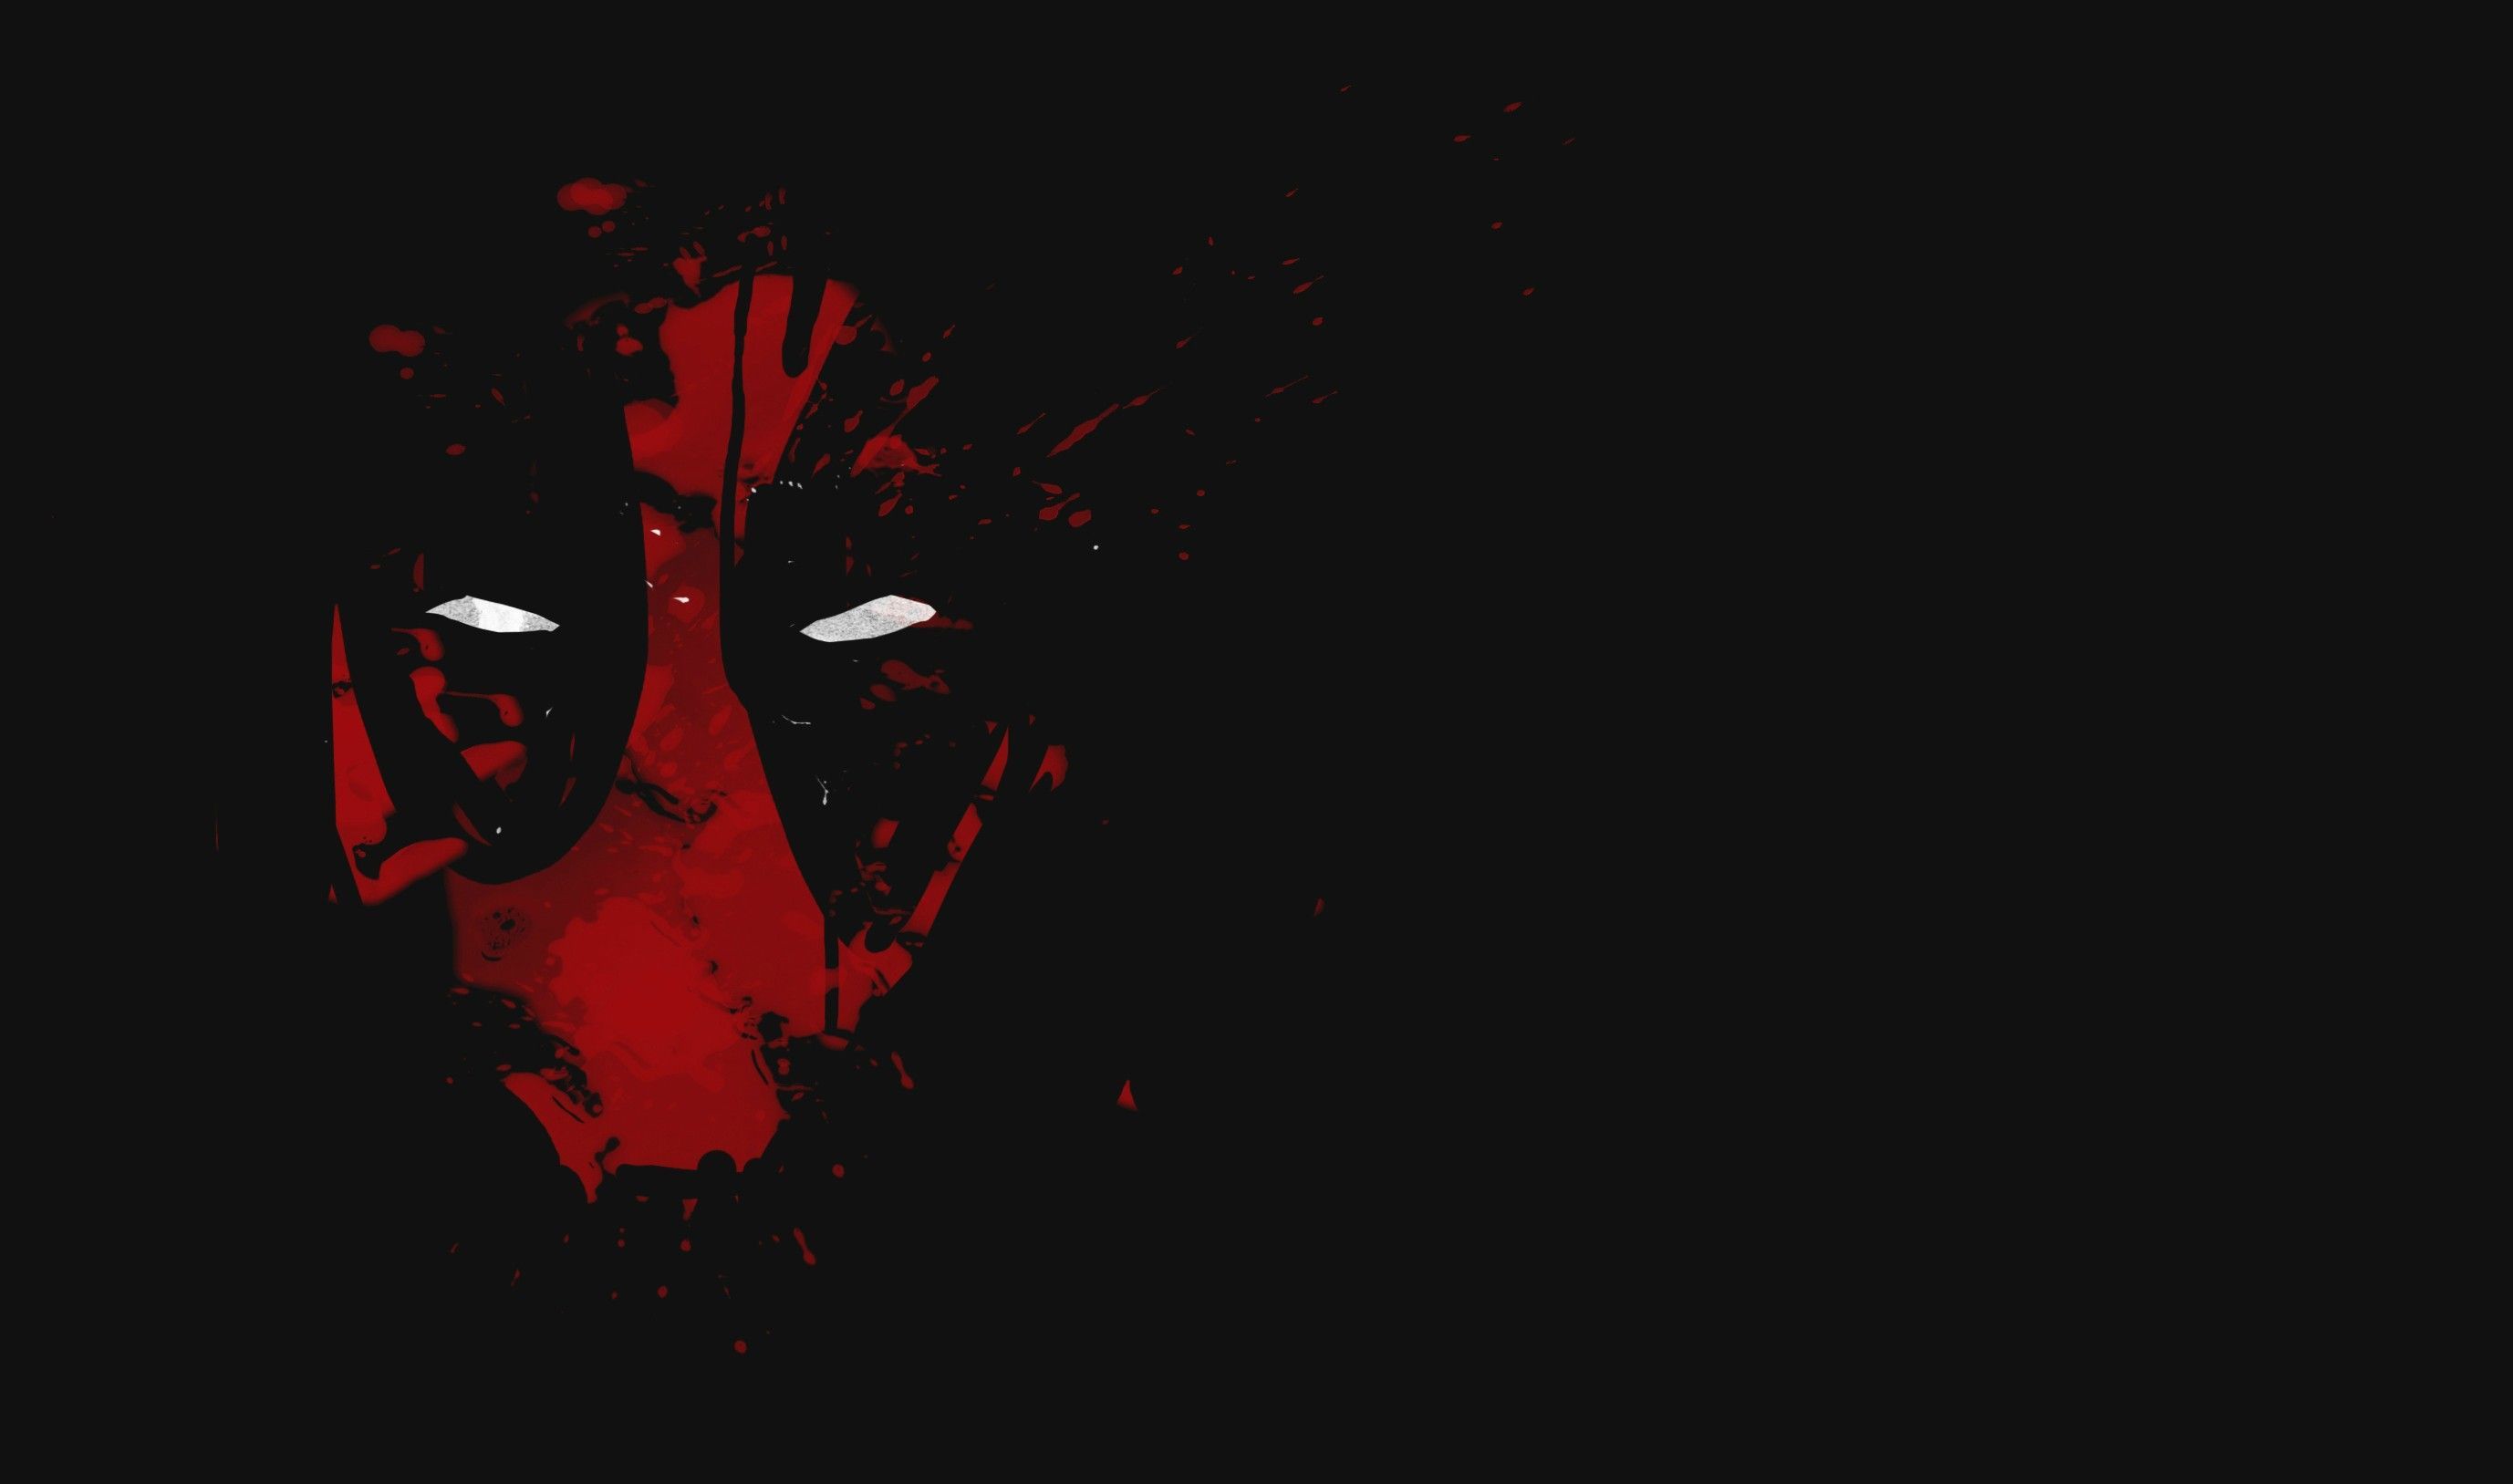 You guys want some Deadpool wallpapers? - Album on Imgur